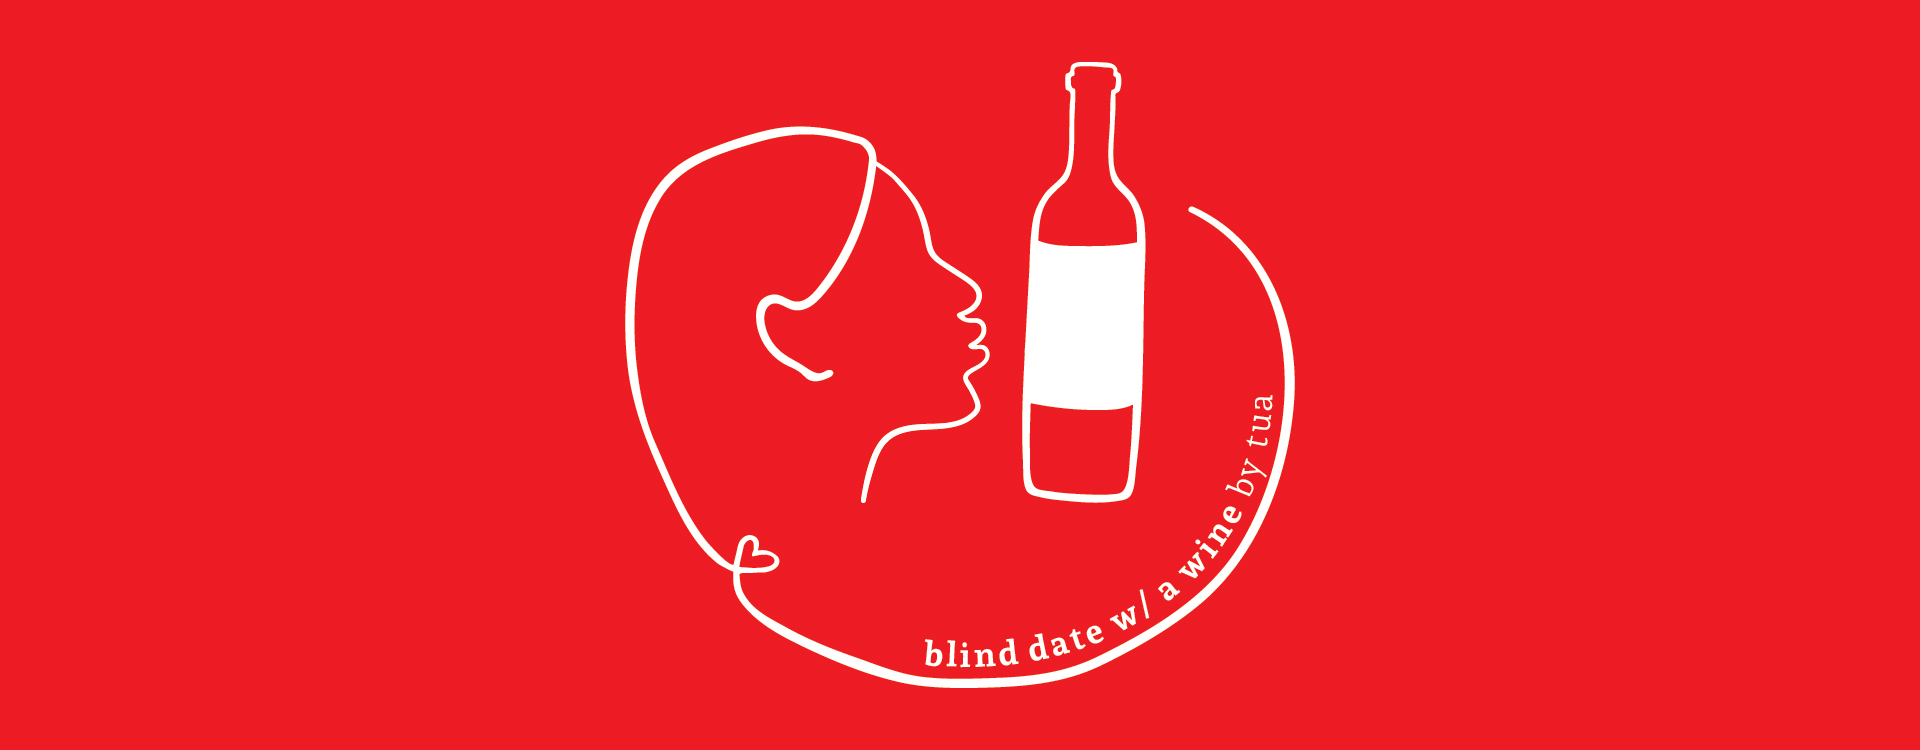 Blind date with a wine